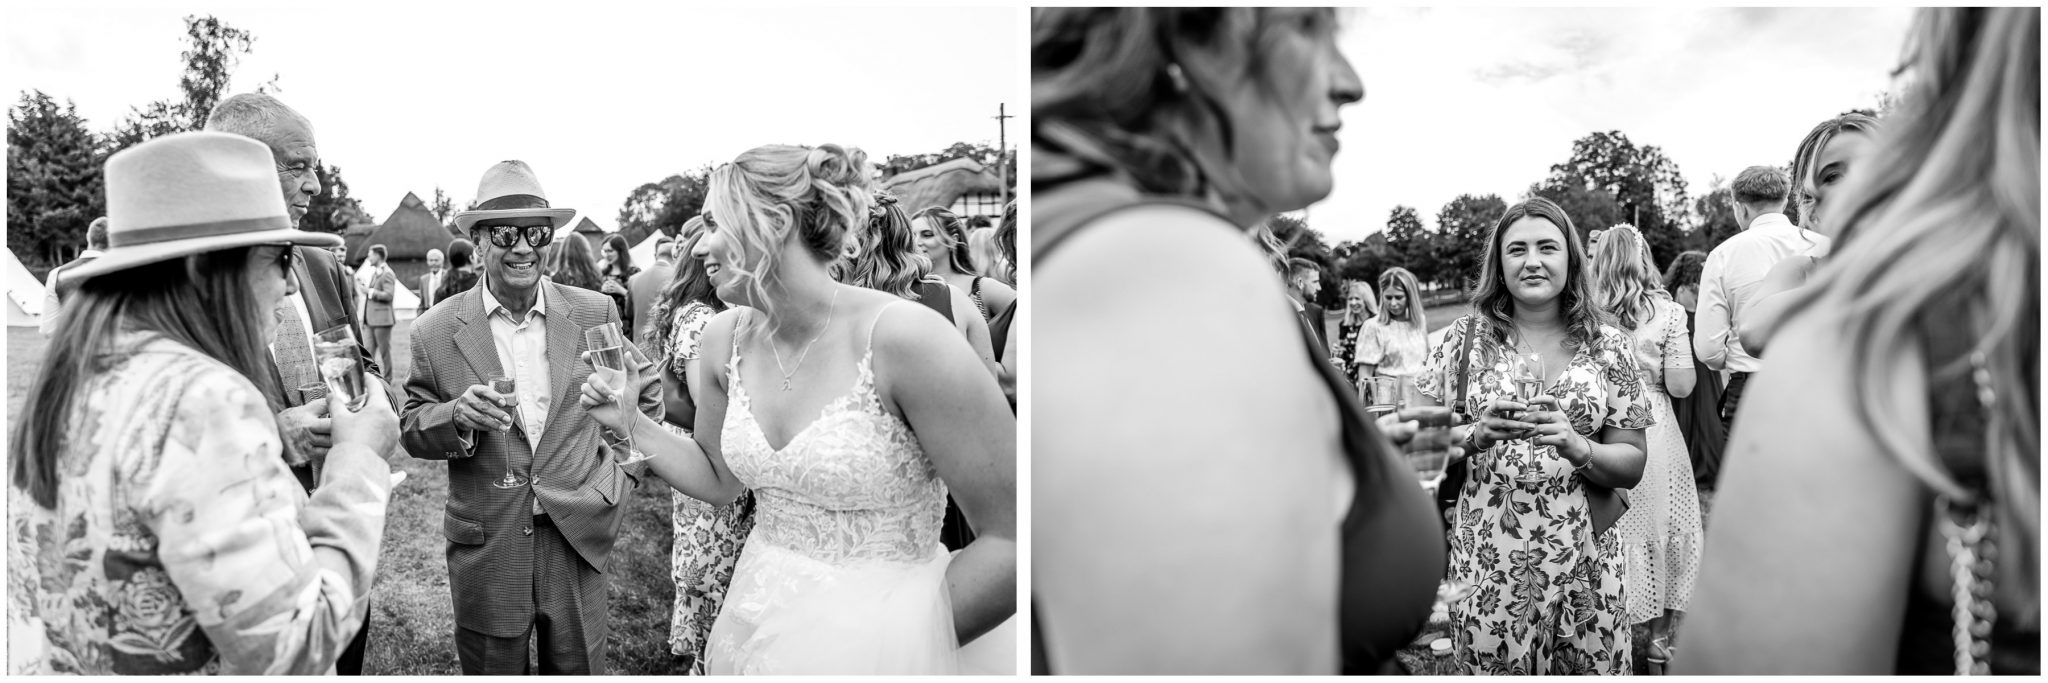 Black and white candid photos of bride and wedding guests